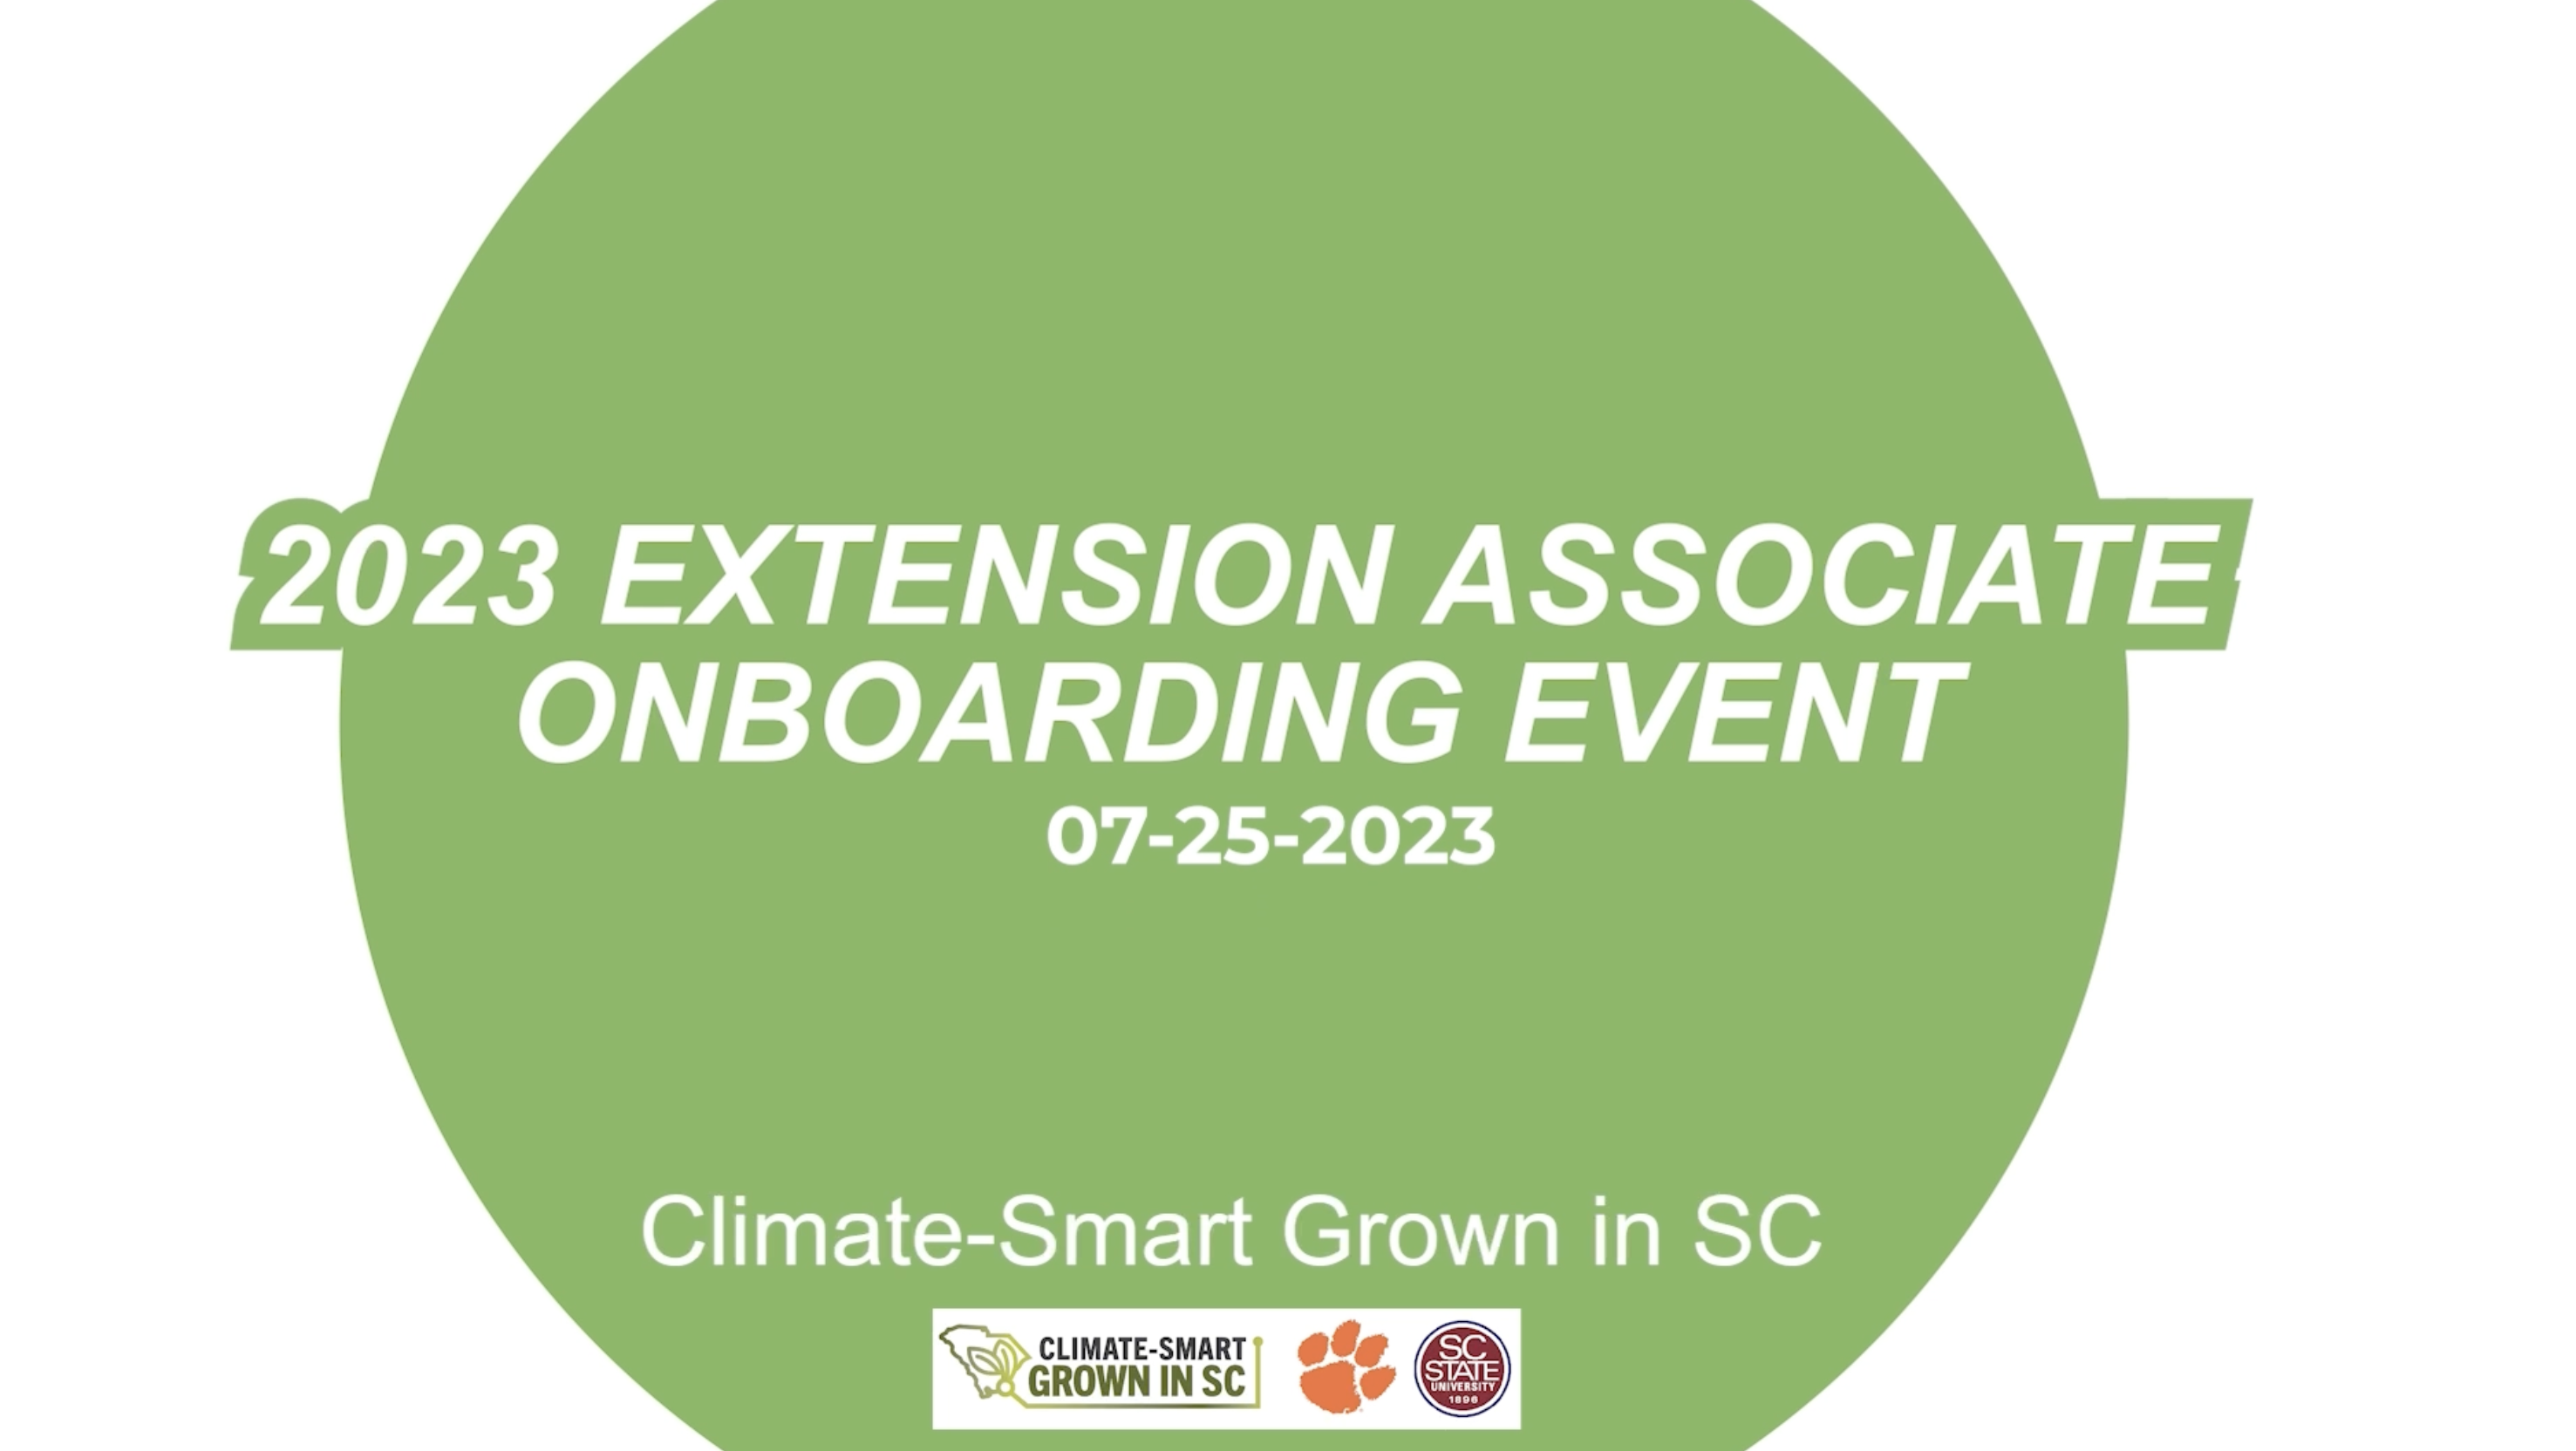 Onboarding Event and Date